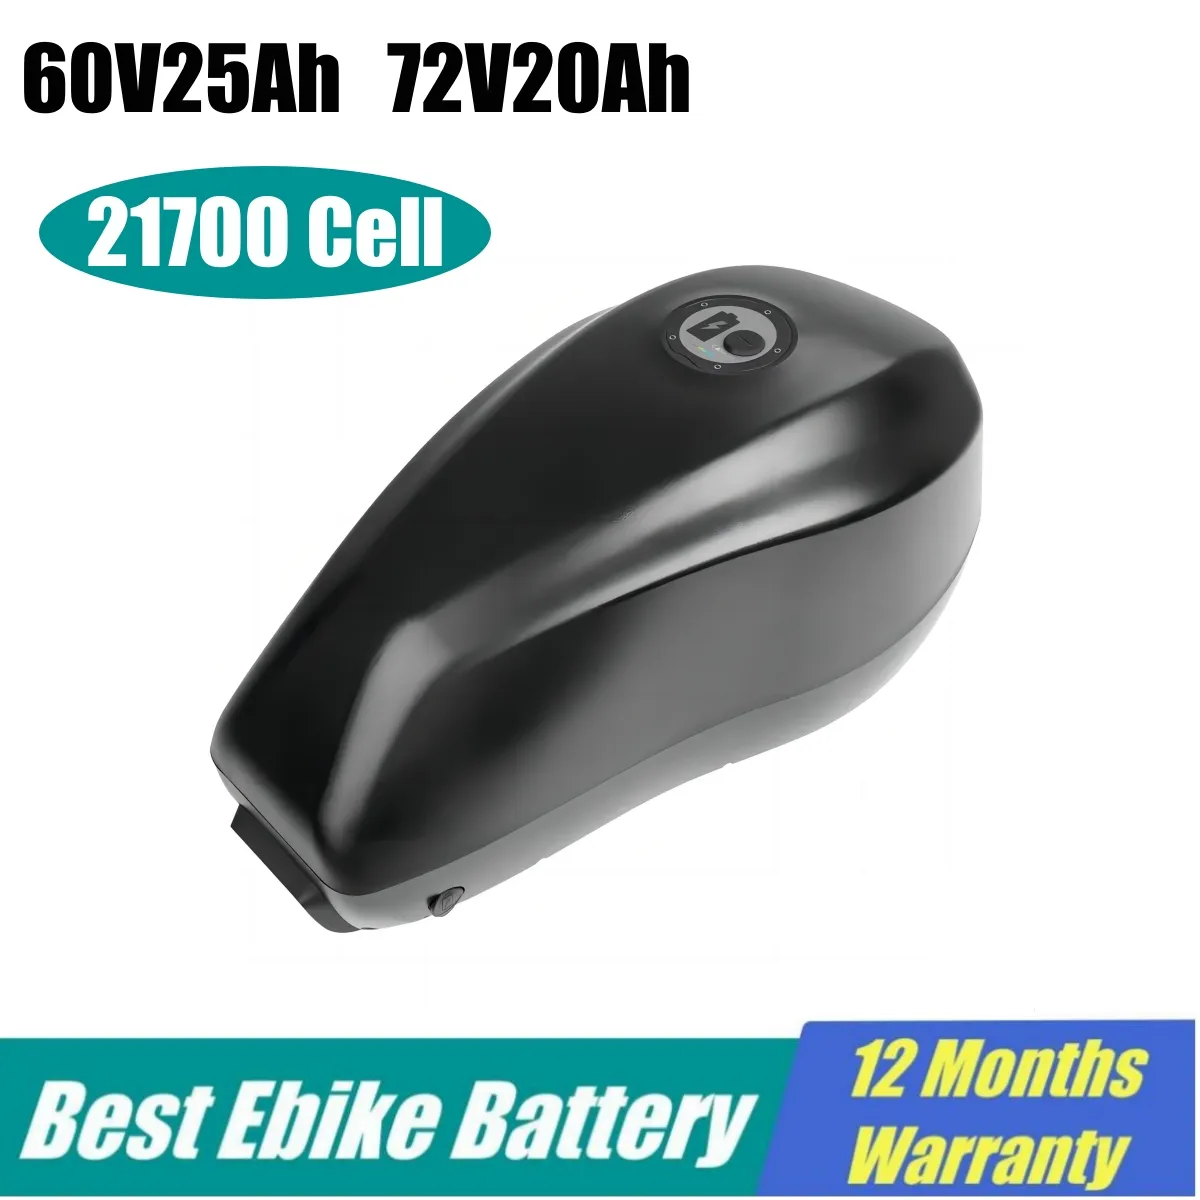 60V 72V eBike Battery 21700 Cell 20Ahh 30Ah Electric Bicycle Bateria Pack for Bafang TSDZ2 2000W 1500W 1000W 750W 500W Motor